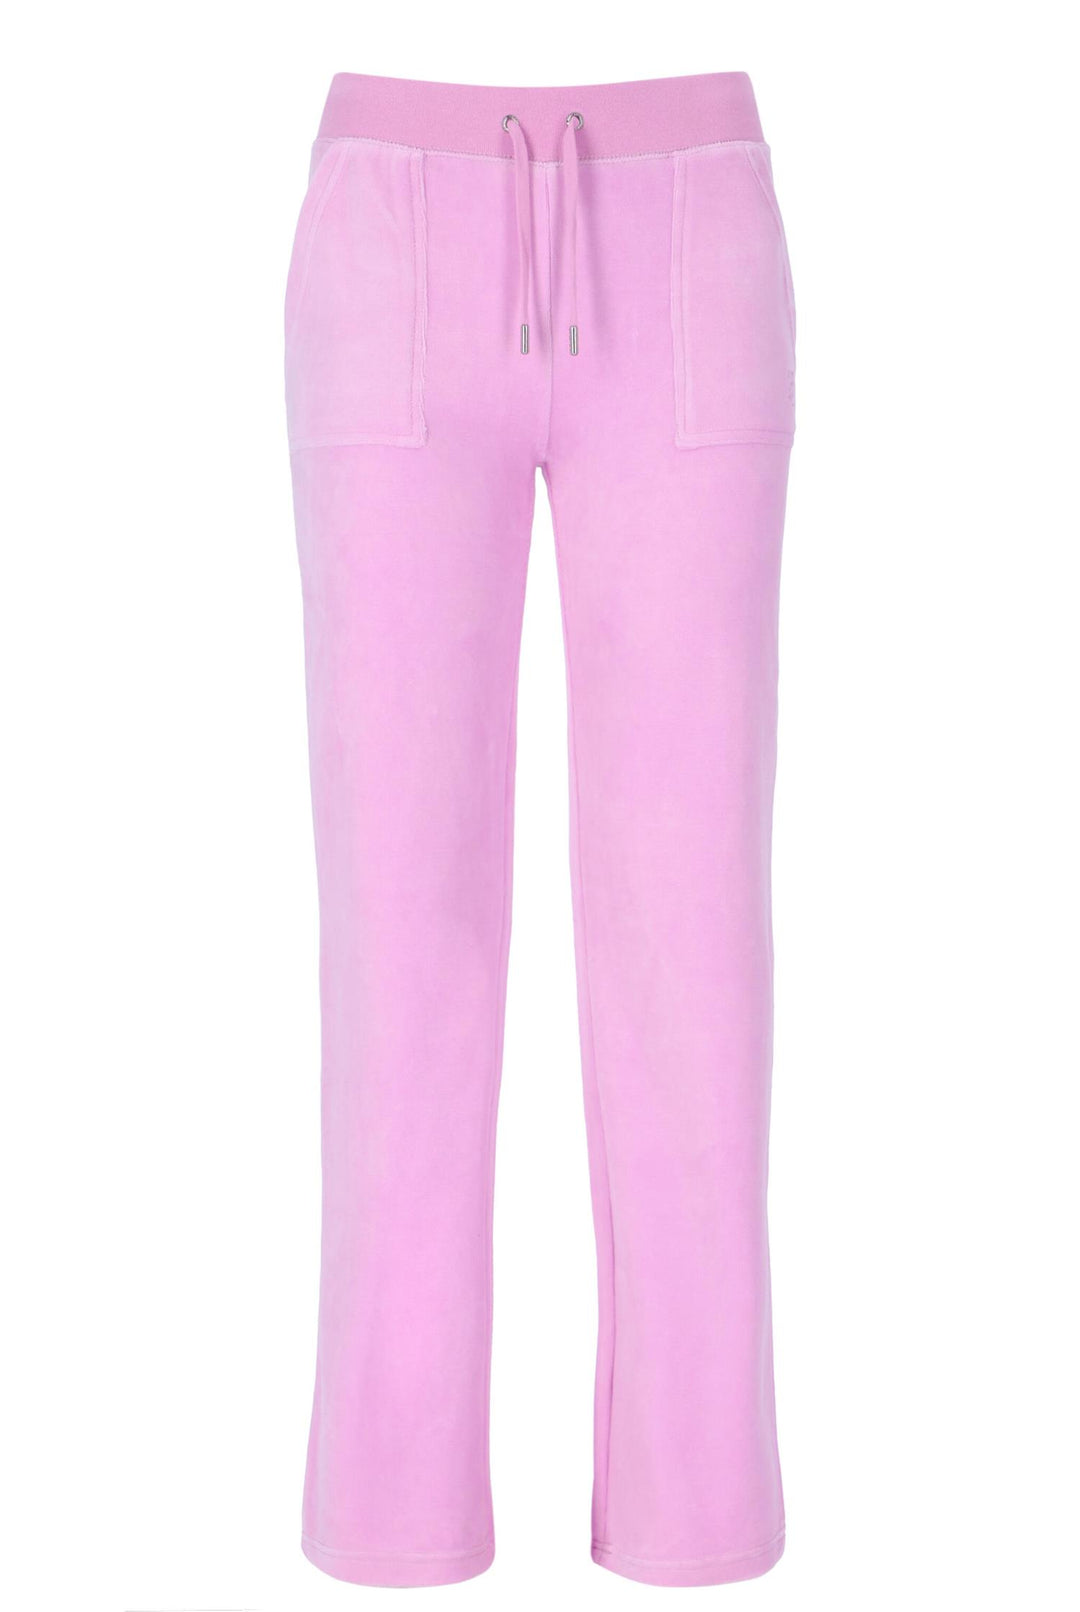 DEL RAY CLASSIC VELOUR PANT POCKET DESIGN  Orchid